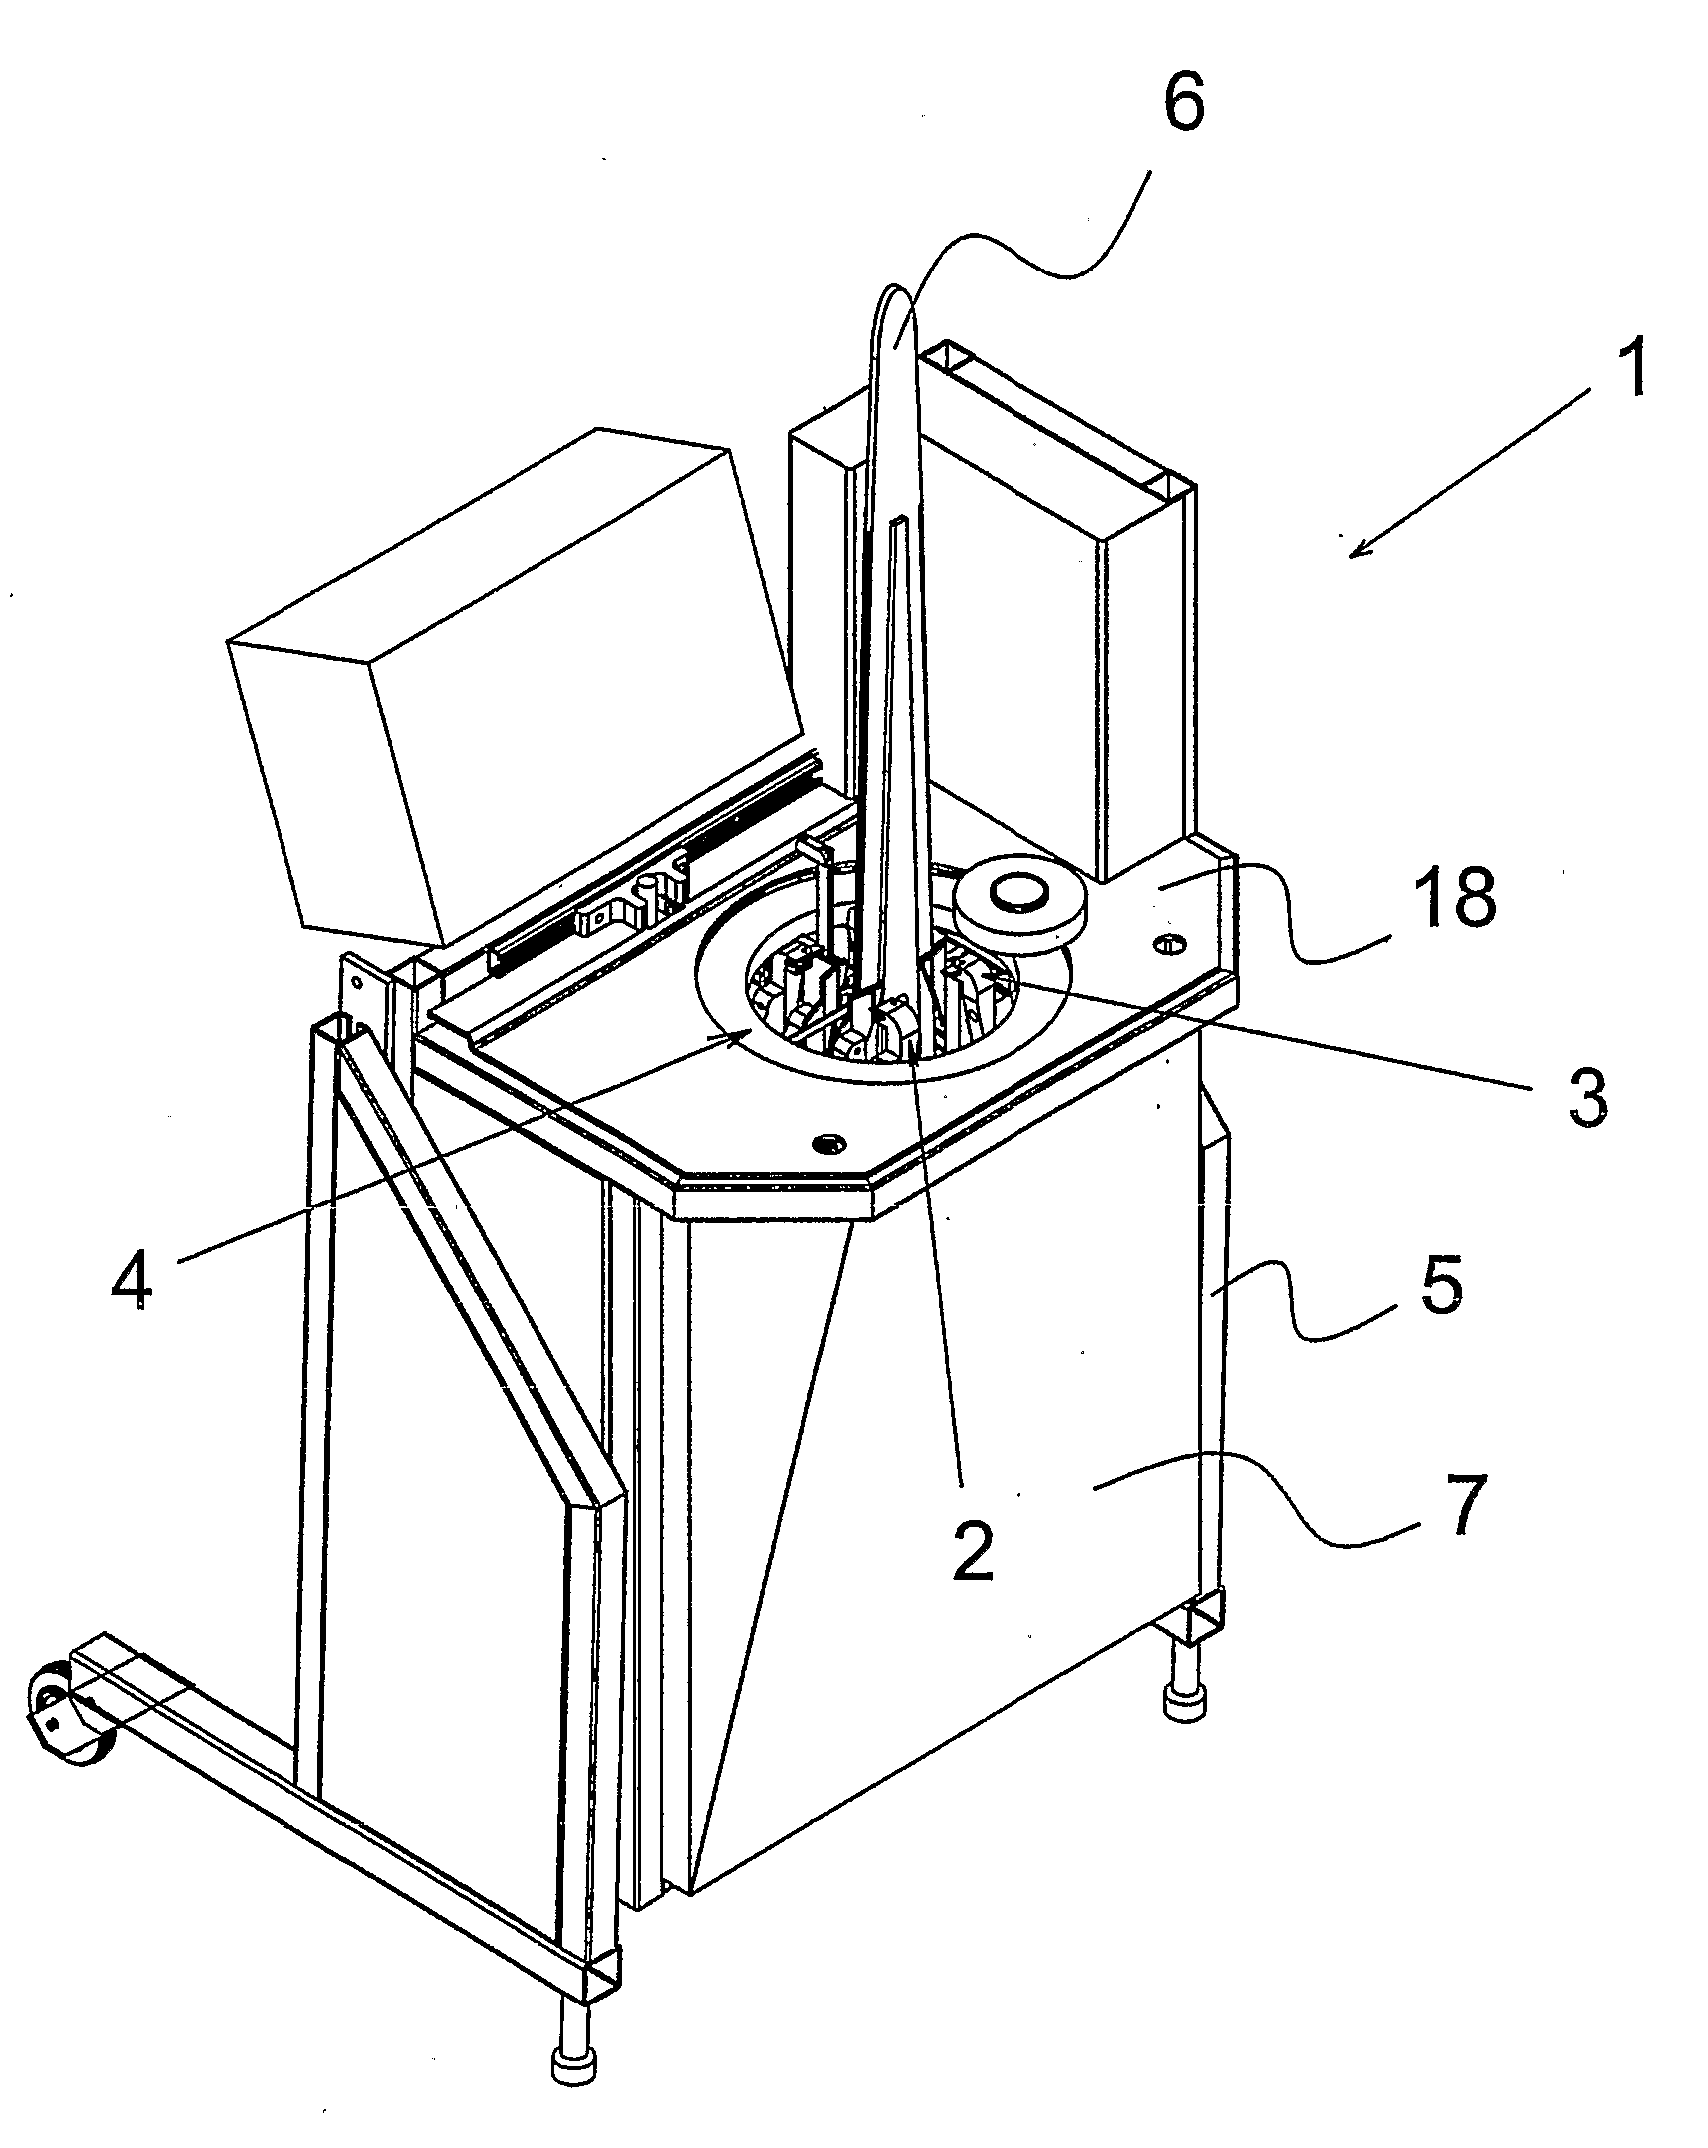 Method And Apparatus For Fastening Fur On A Pelting Board And Winding Material Therefor